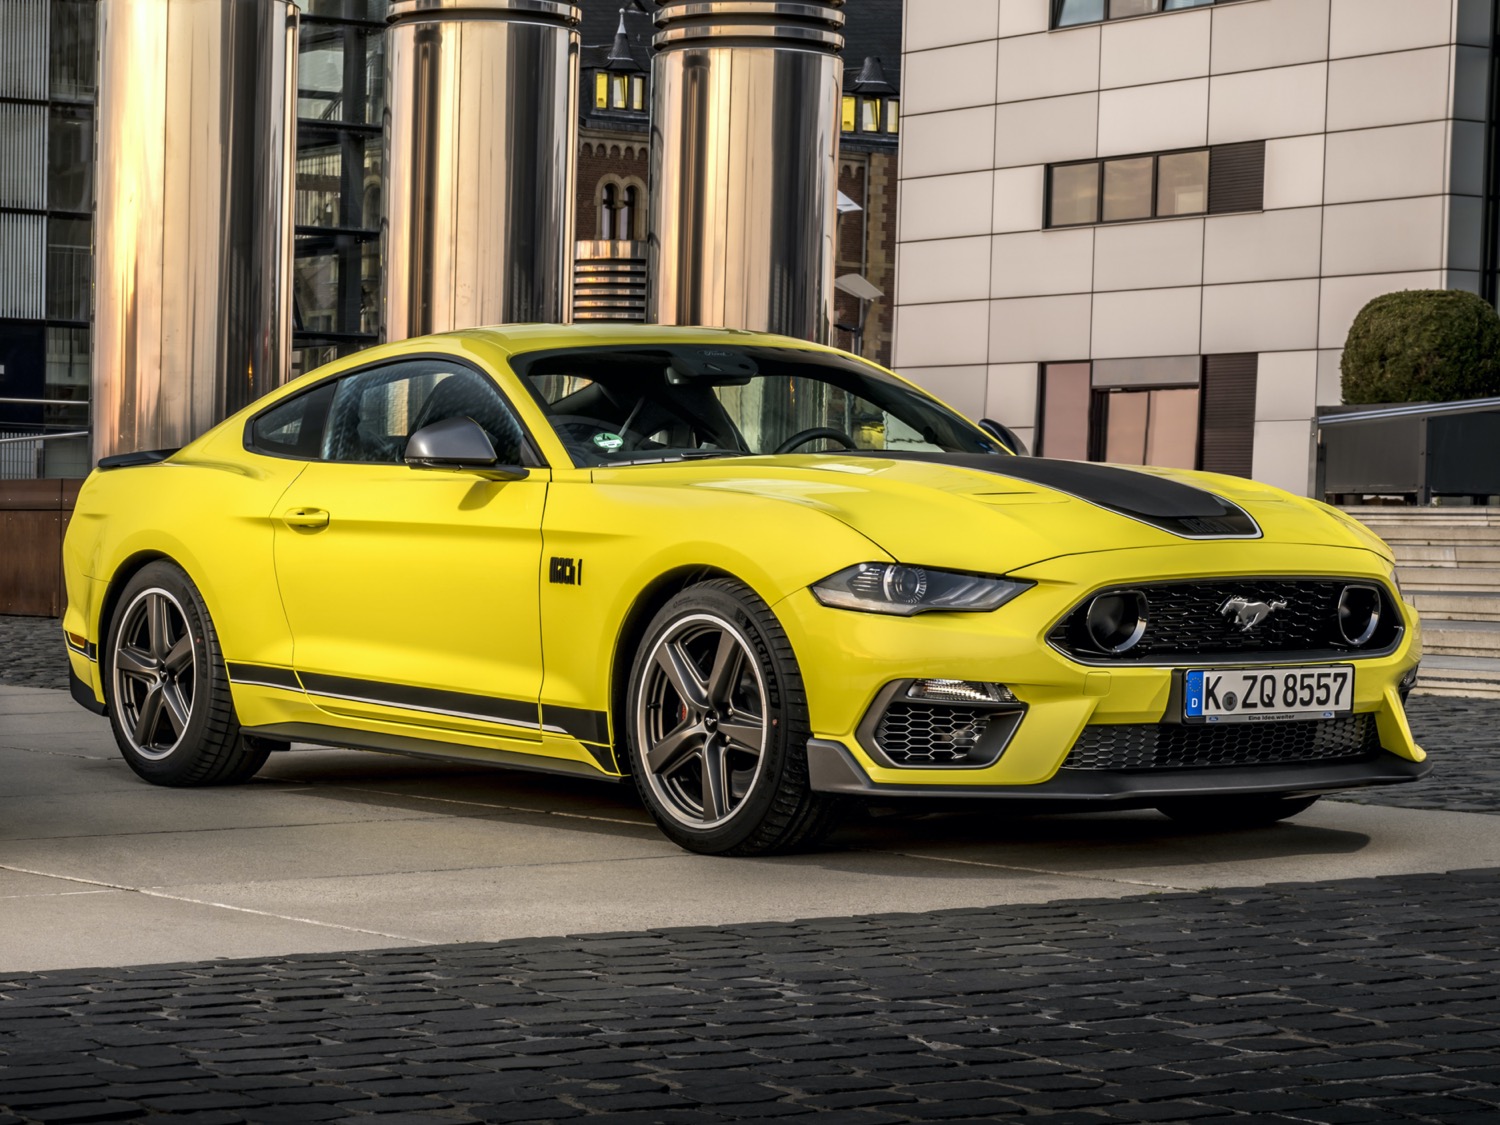 2021 Mustang Ordering And Production Dates Revealed